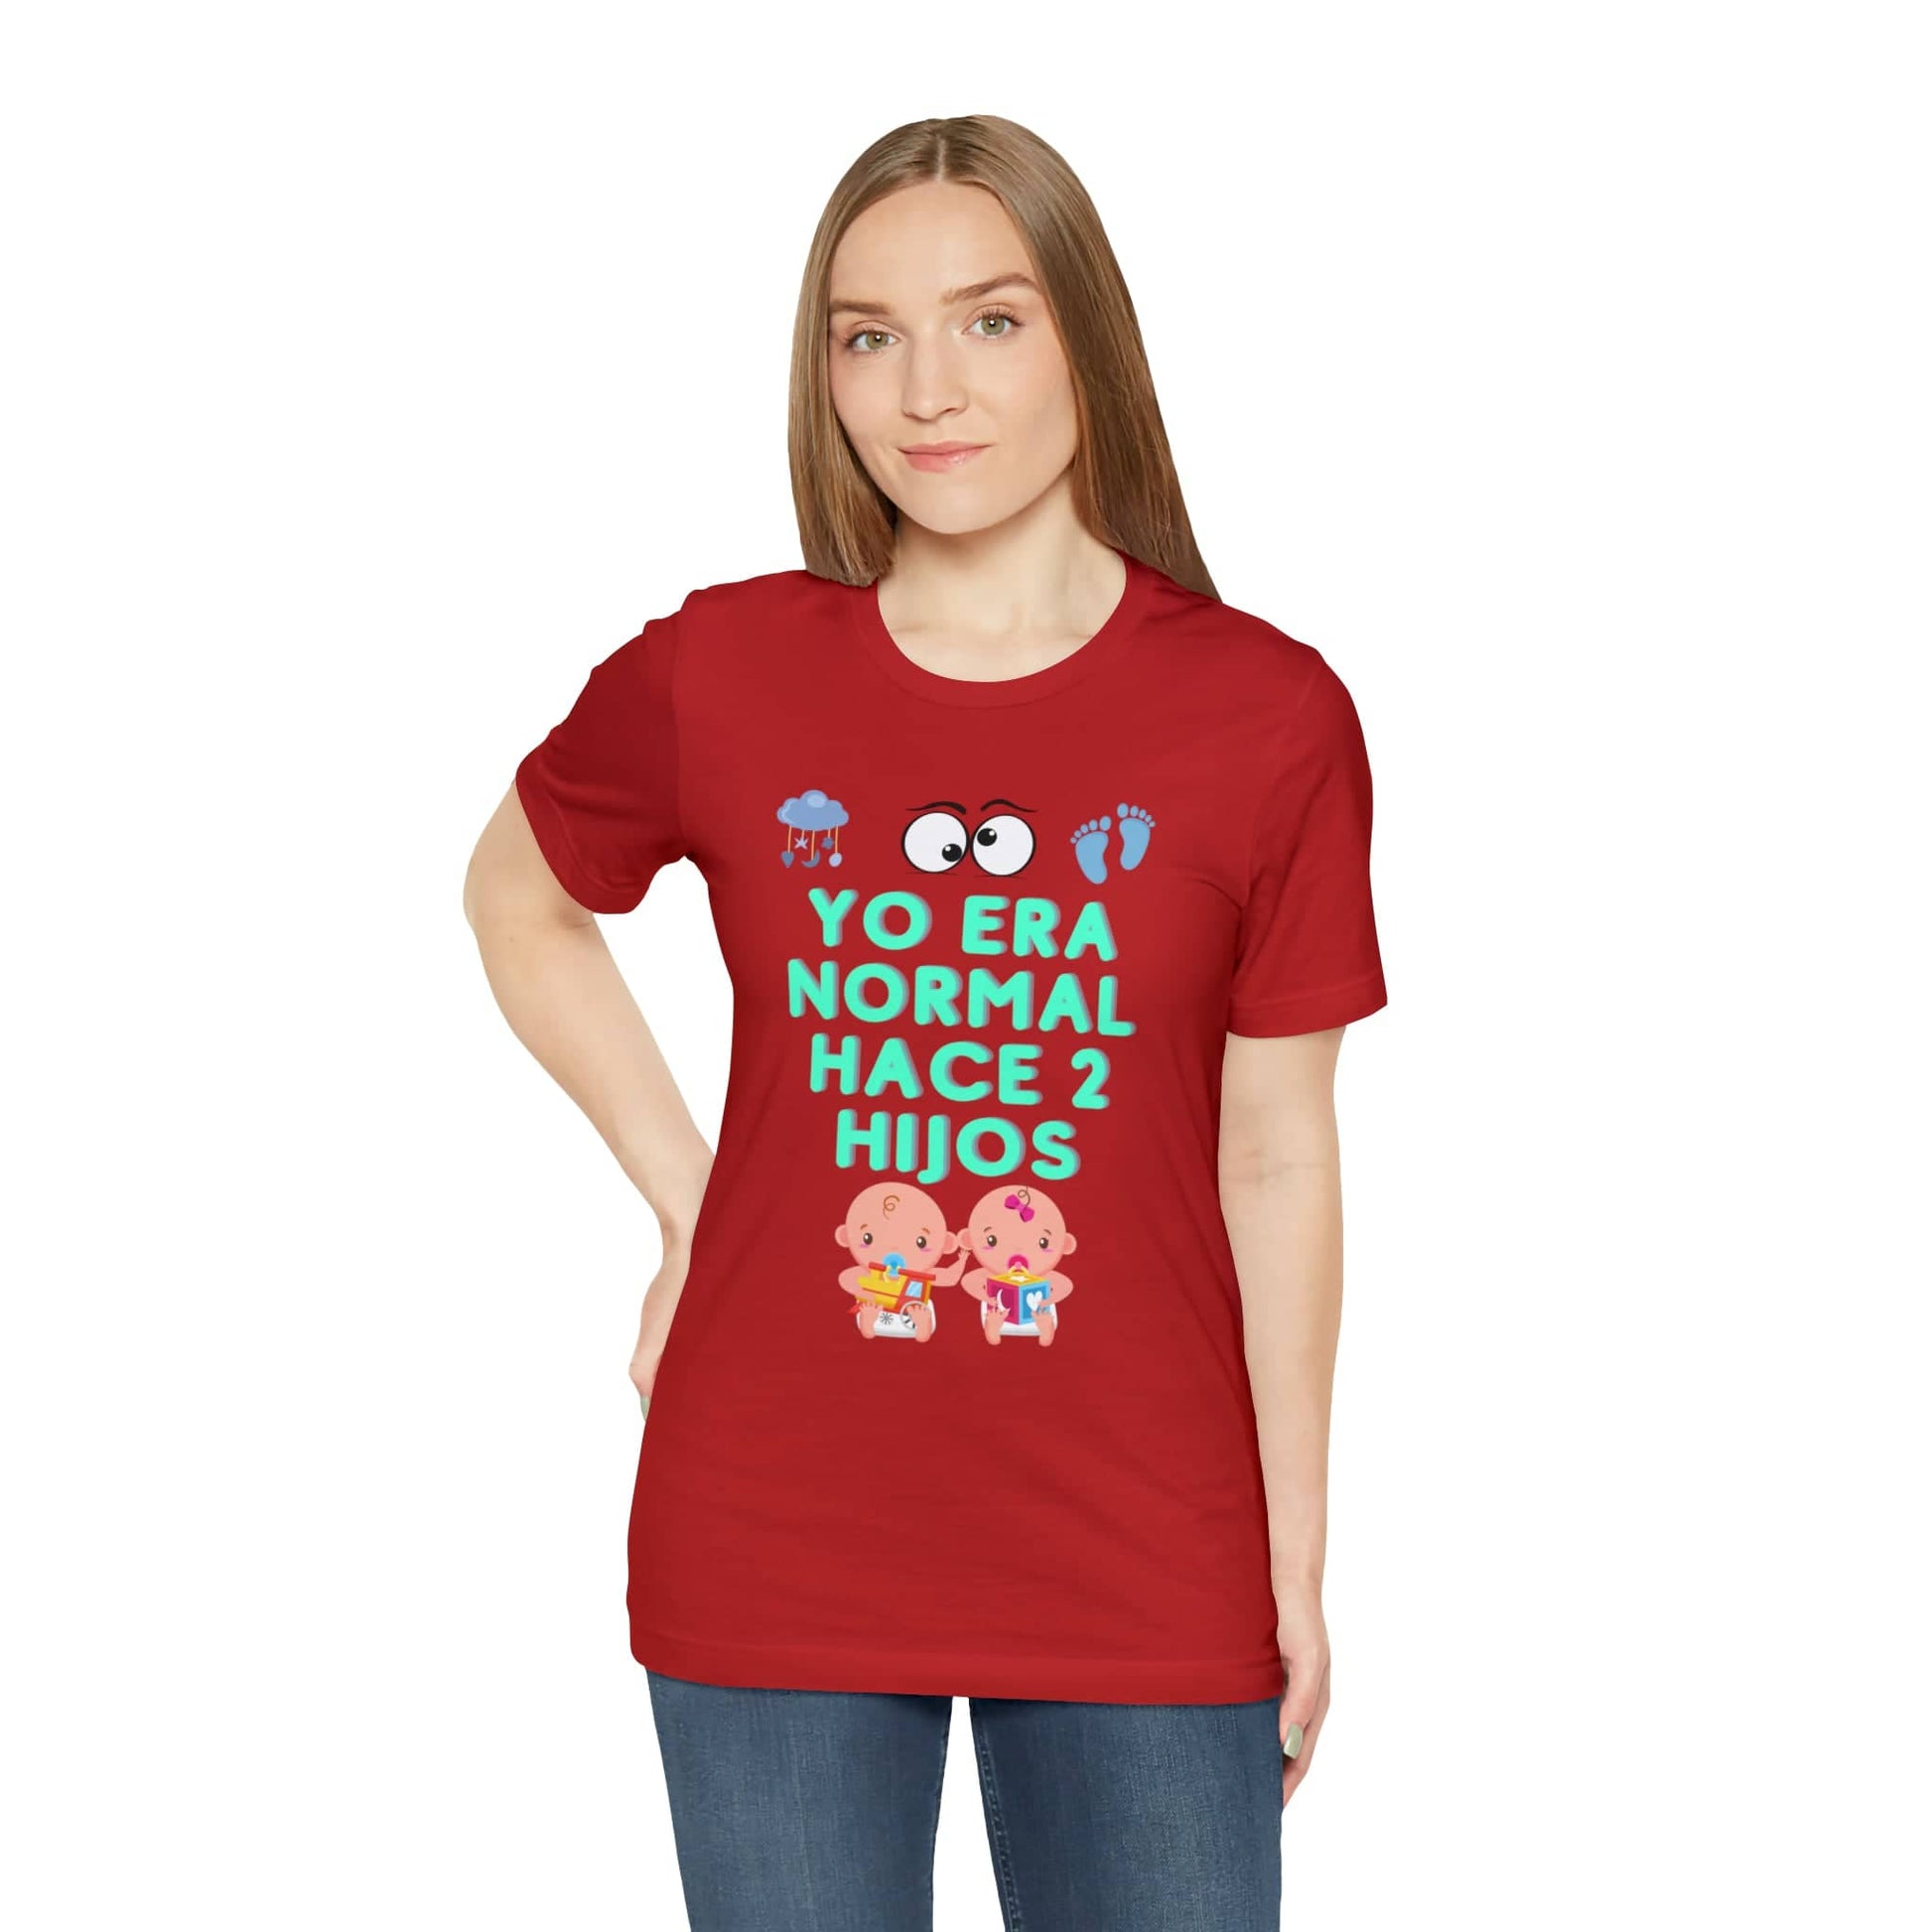 Yo Era Normal Hace 2 Hijos: The Perfect Unisex Tee for the Eternally Busy Parent T-Shirt Bigger Than Life Red S 